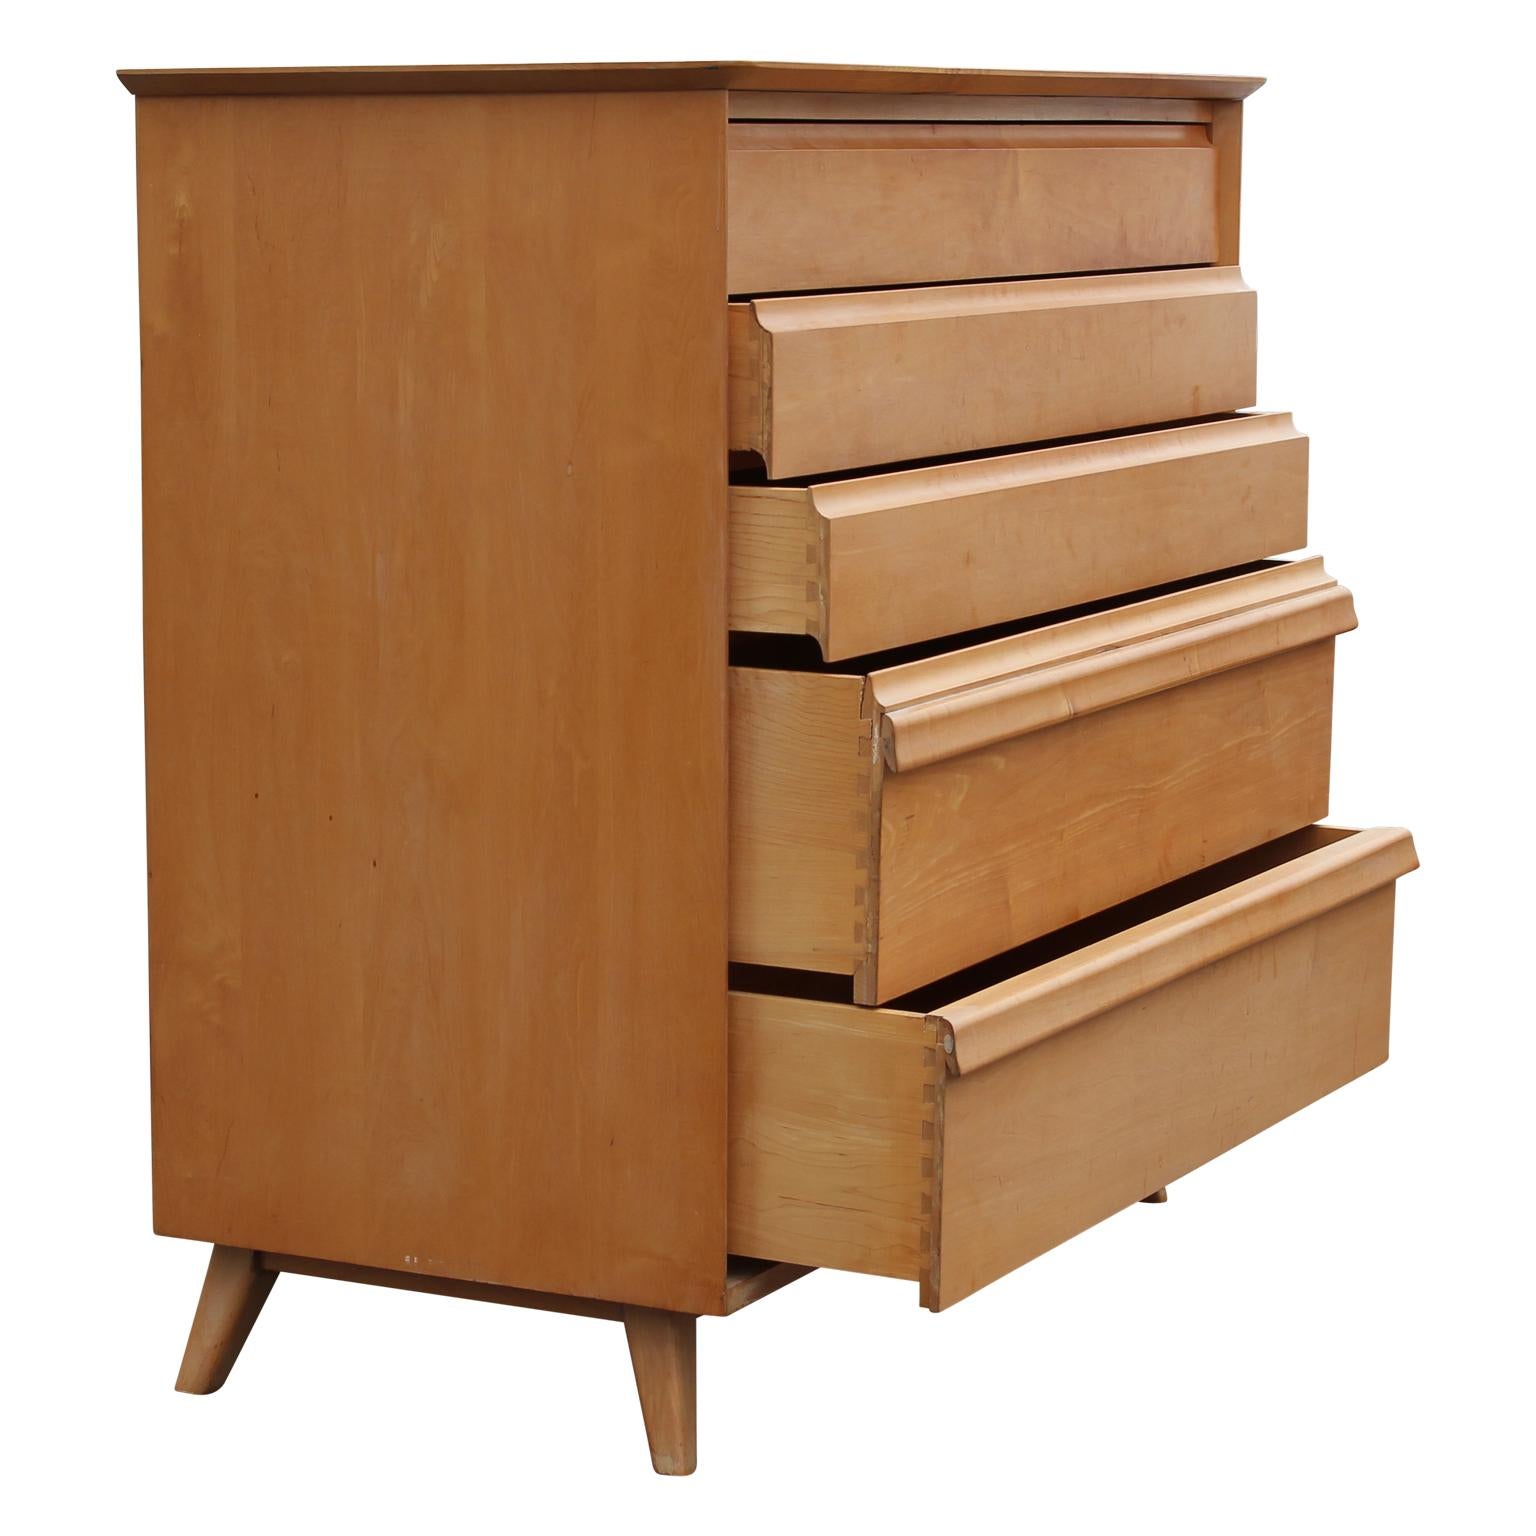 Fantastic Mid-Century Modern 5-drawer birch chest of drawers with louver style drawer pulls from Birchcraft by Baumritter.